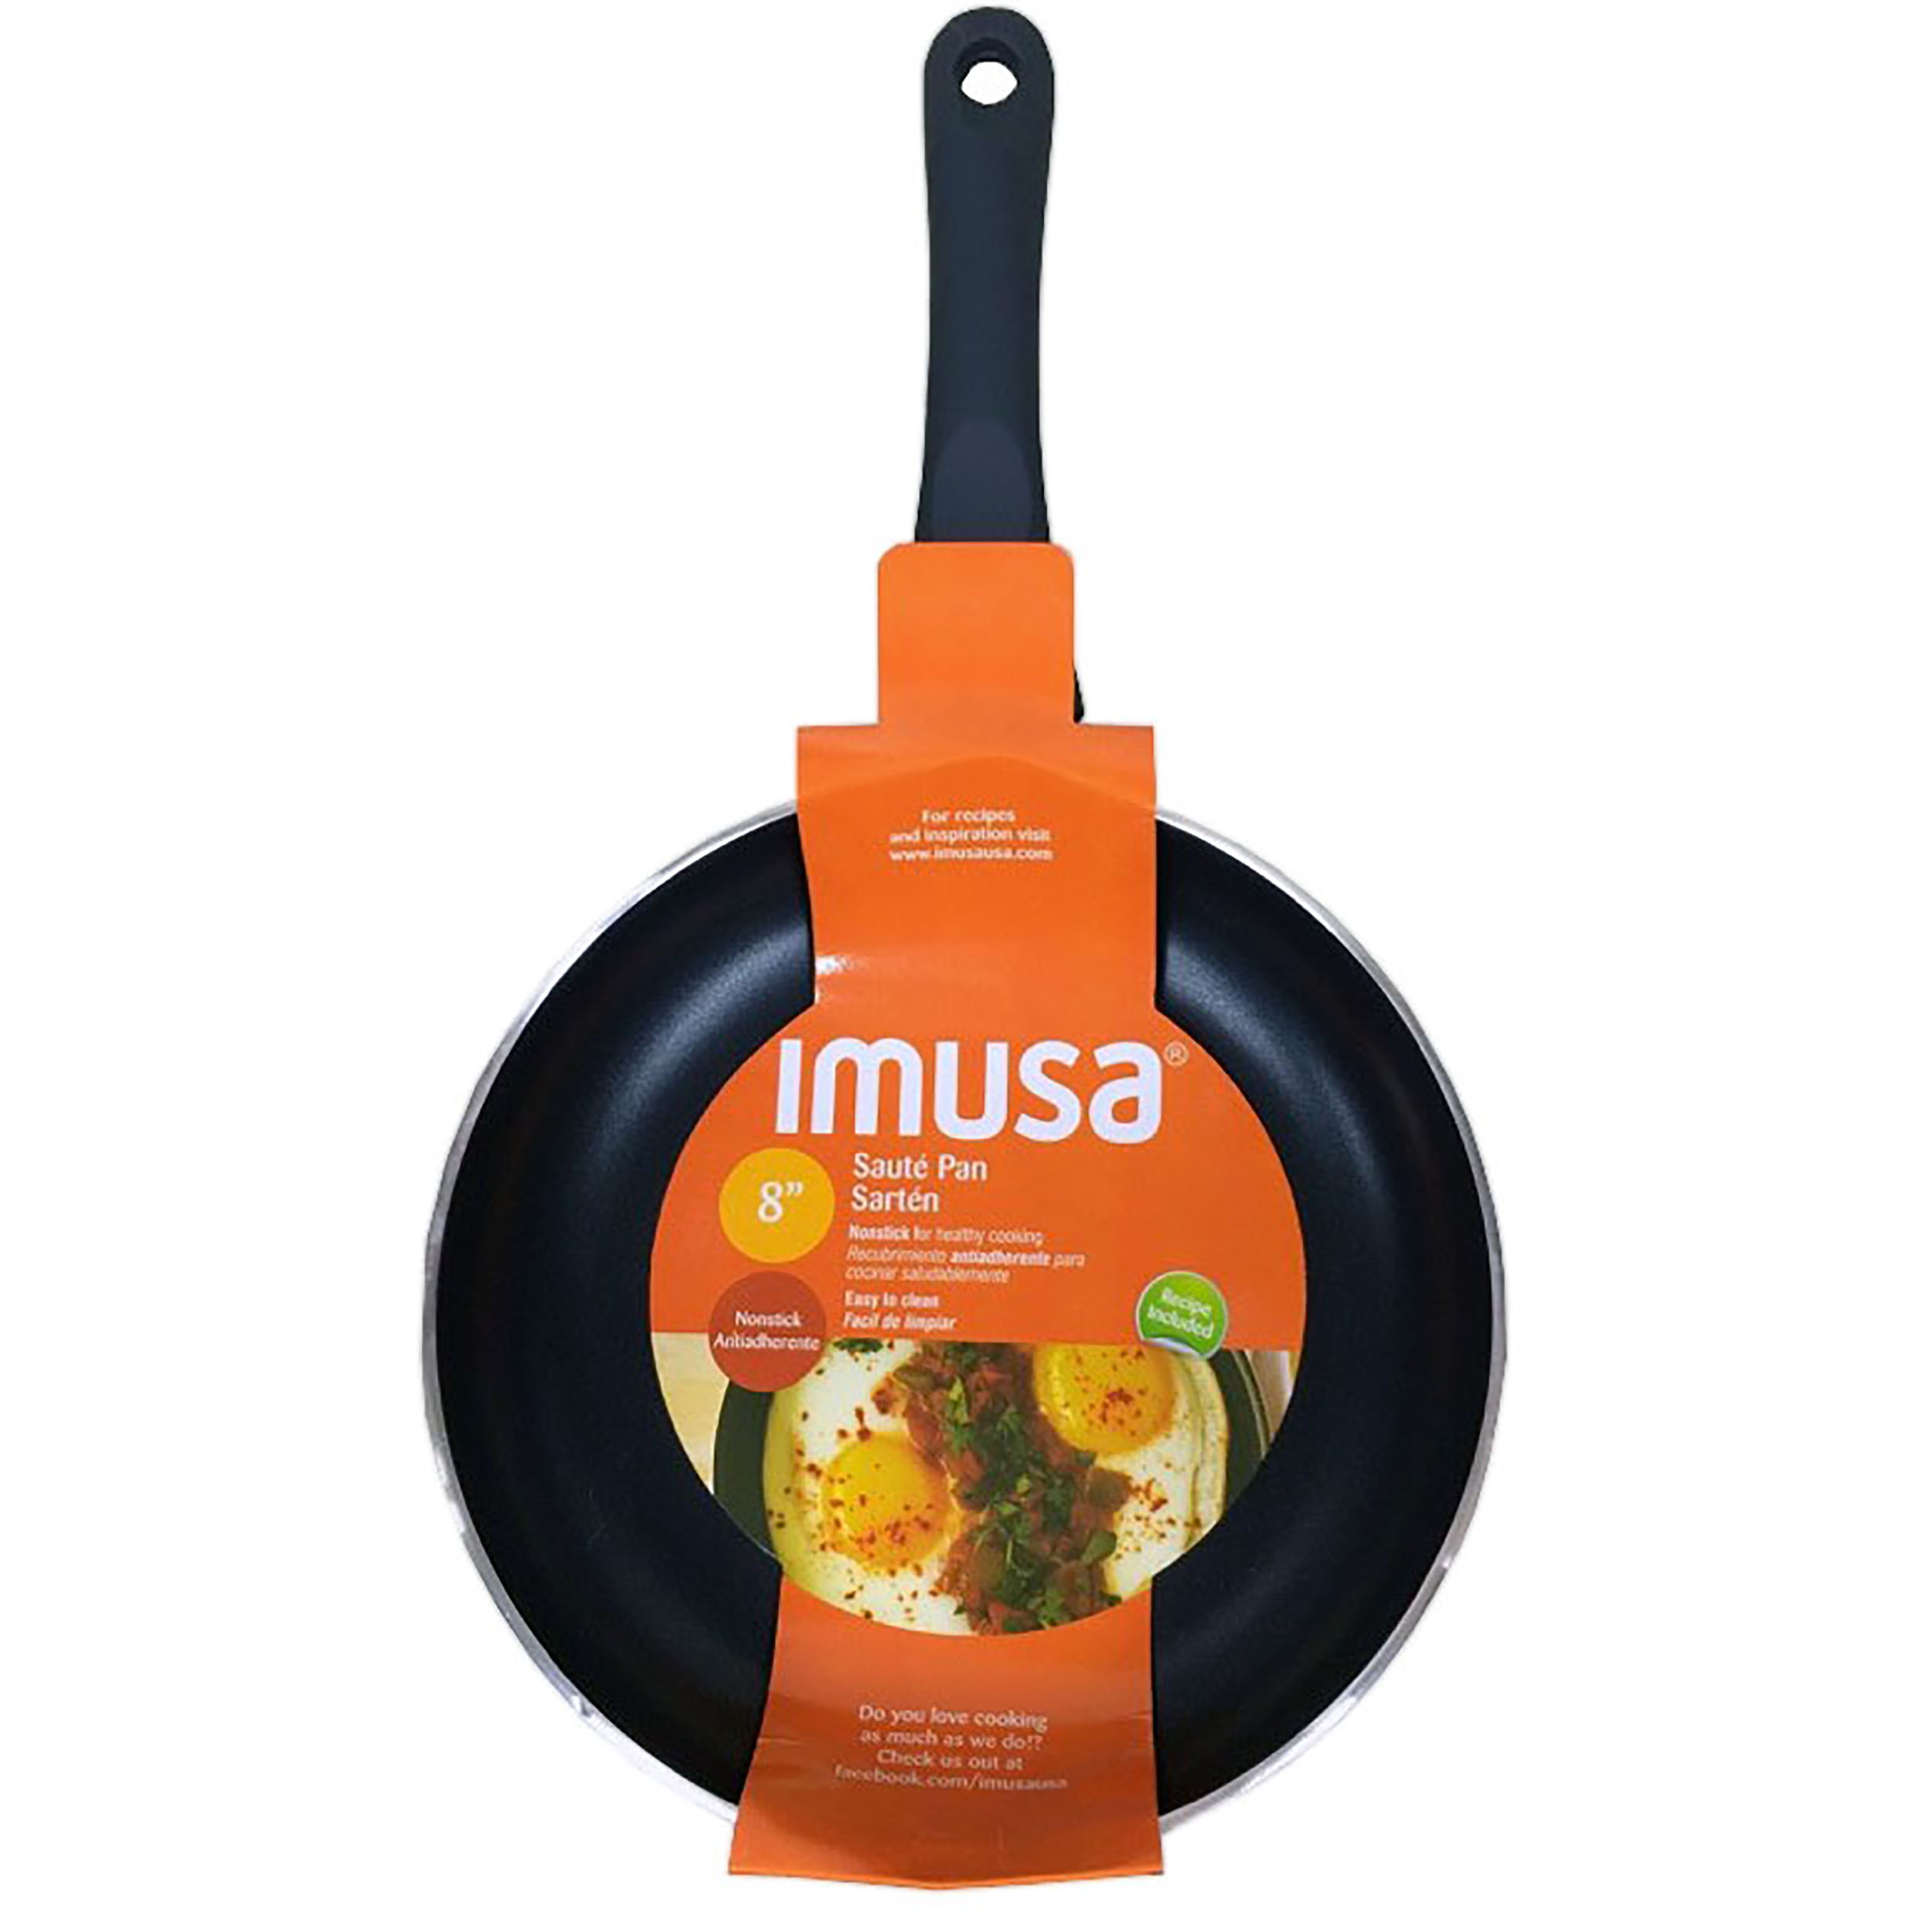 IMUSA IMUSA 12 Piece Charcoal PTFE Nonstick Cookware Set with